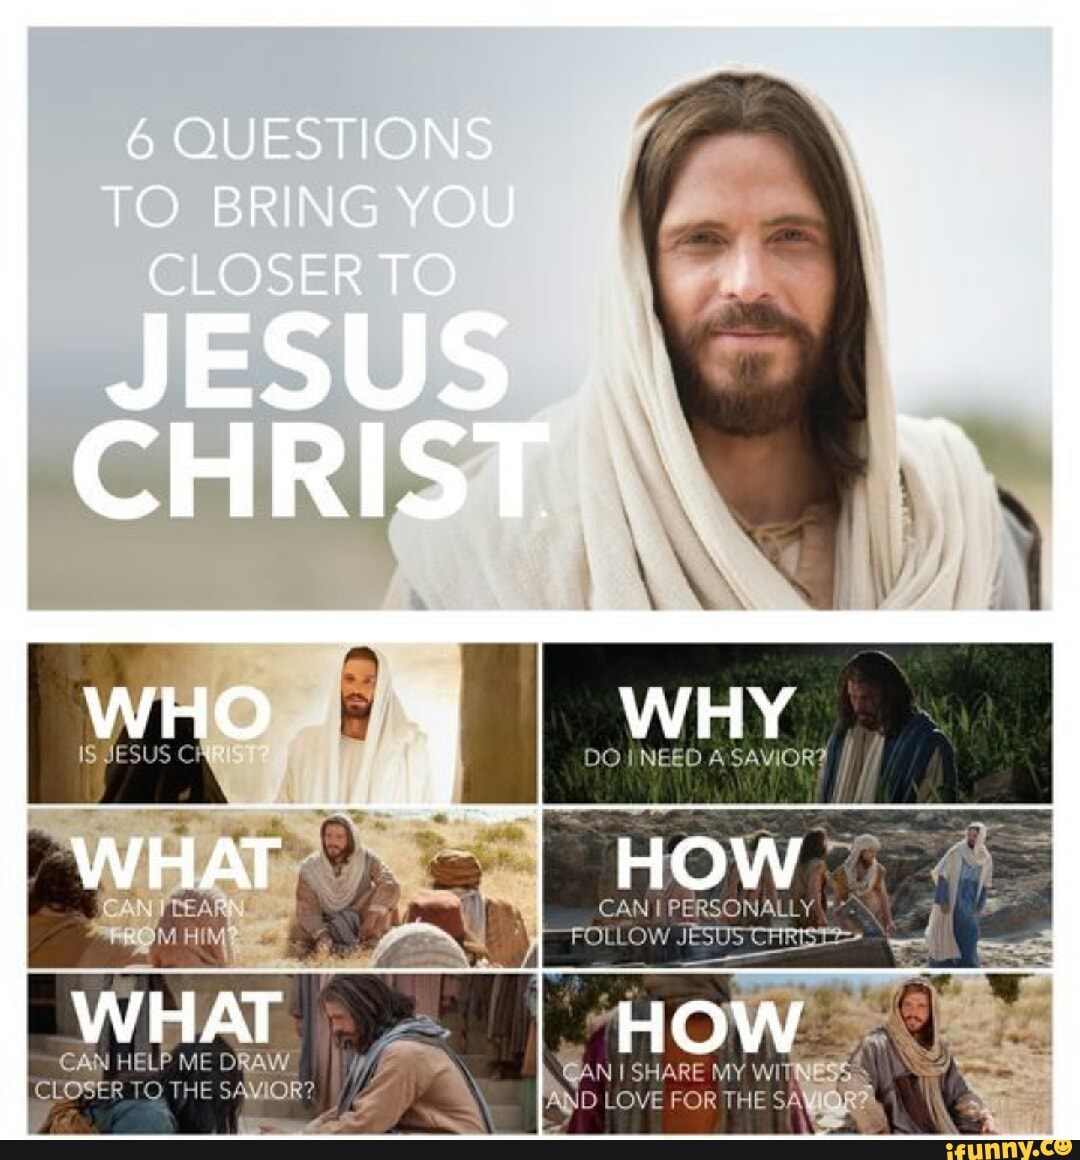 6 Questions To Bring You Closer To Jesus Christ Why Ow Cani Ca What 